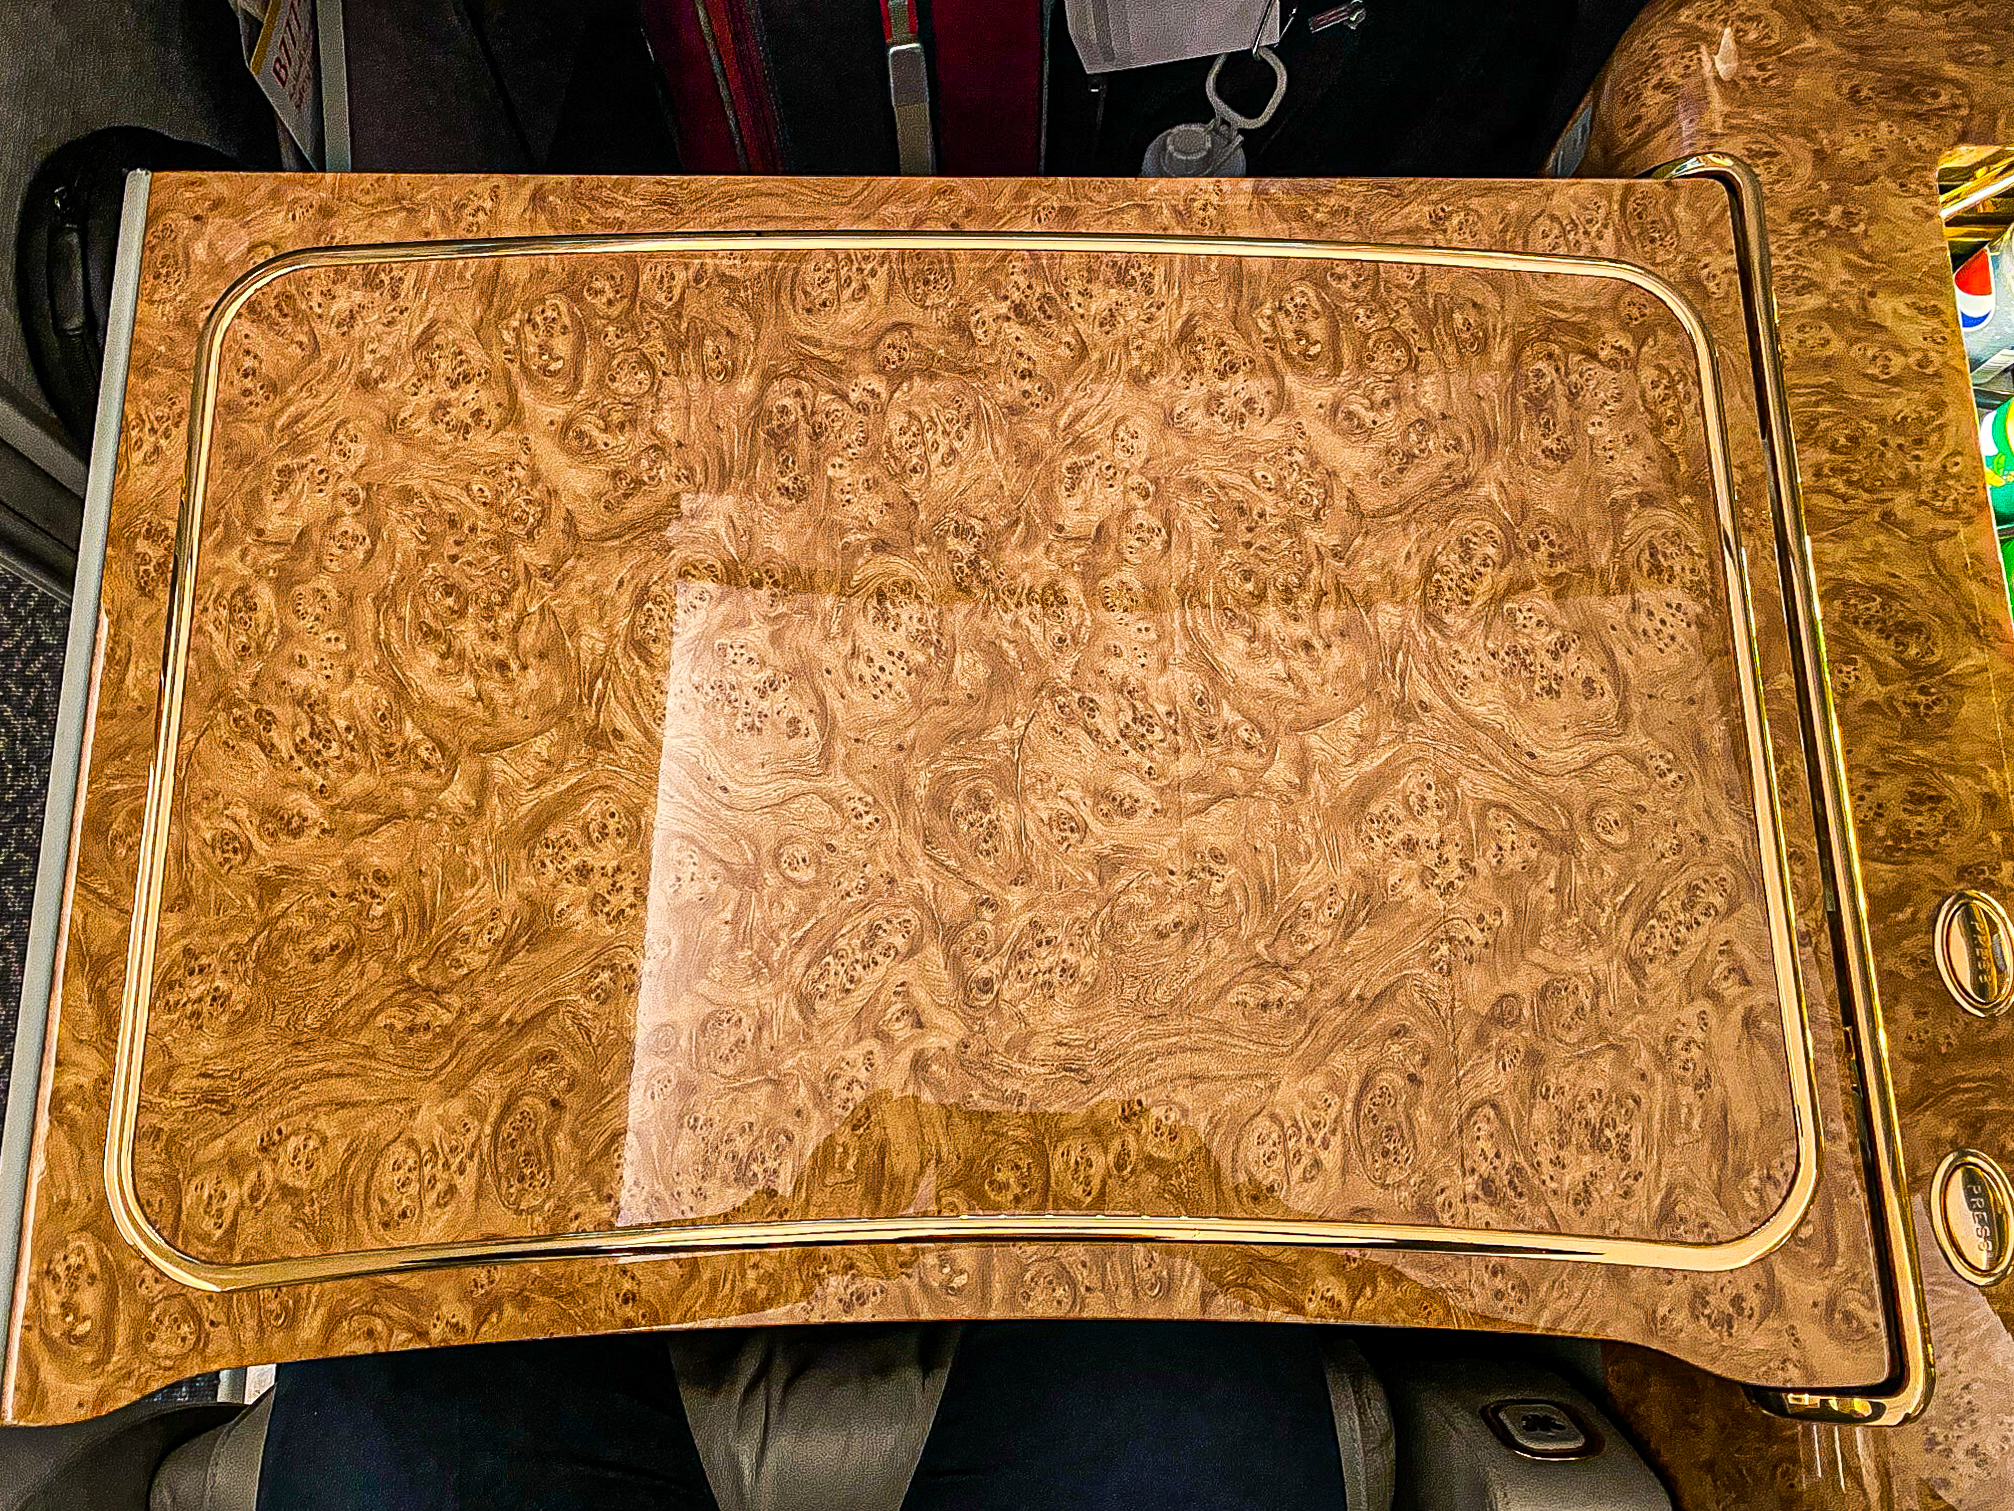 Emirates 777 First Class Tray Table